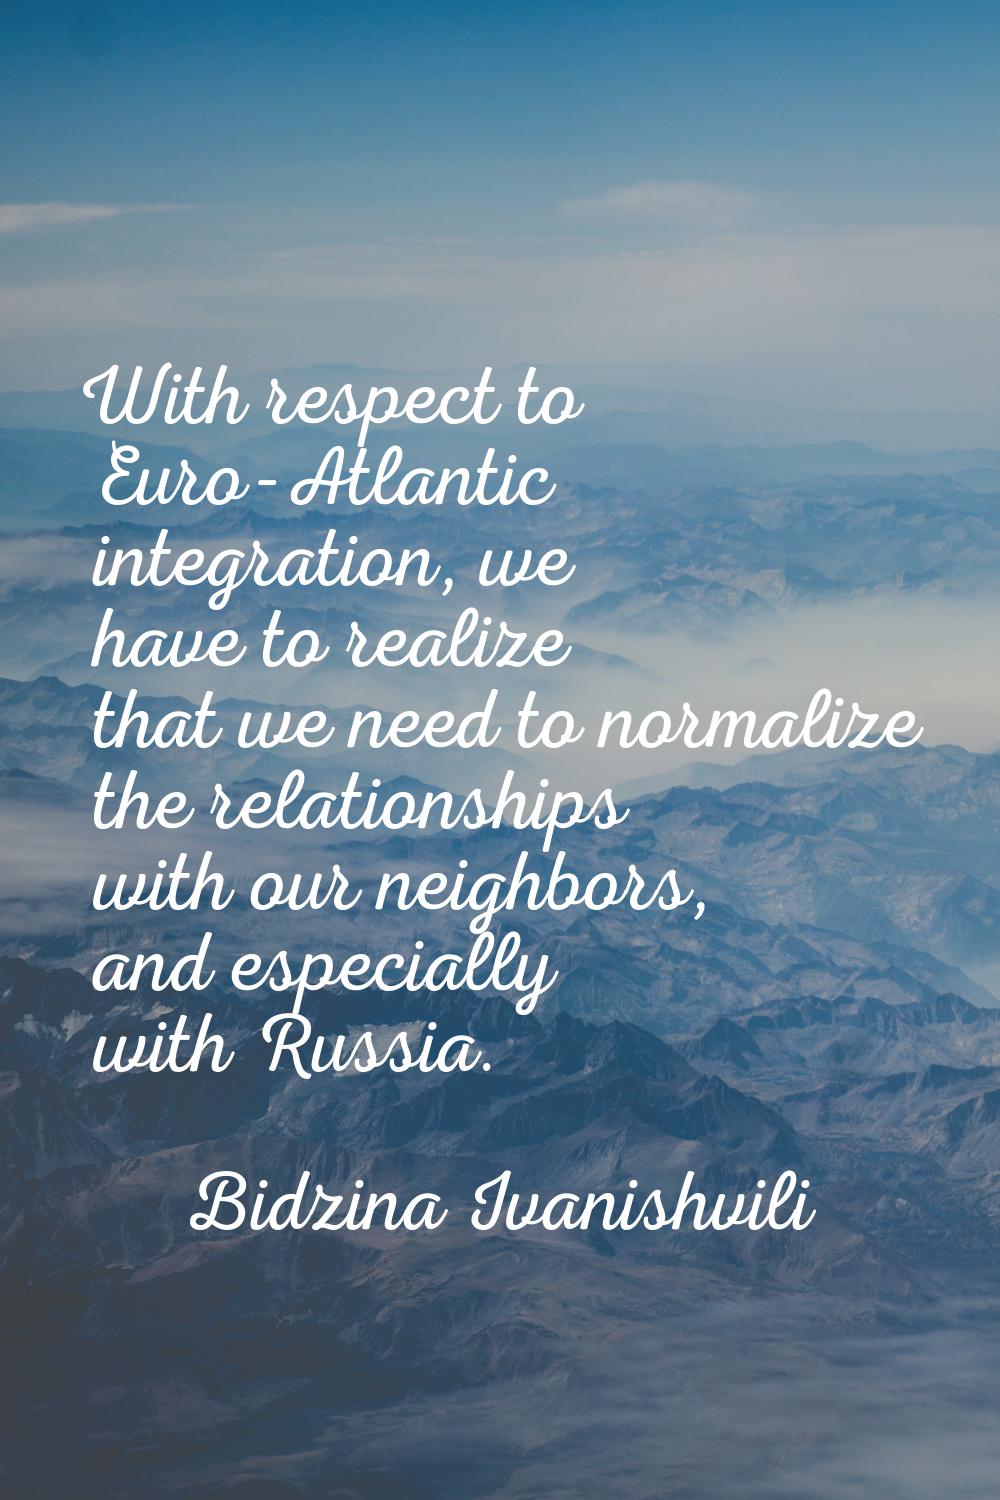 With respect to Euro-Atlantic integration, we have to realize that we need to normalize the relatio